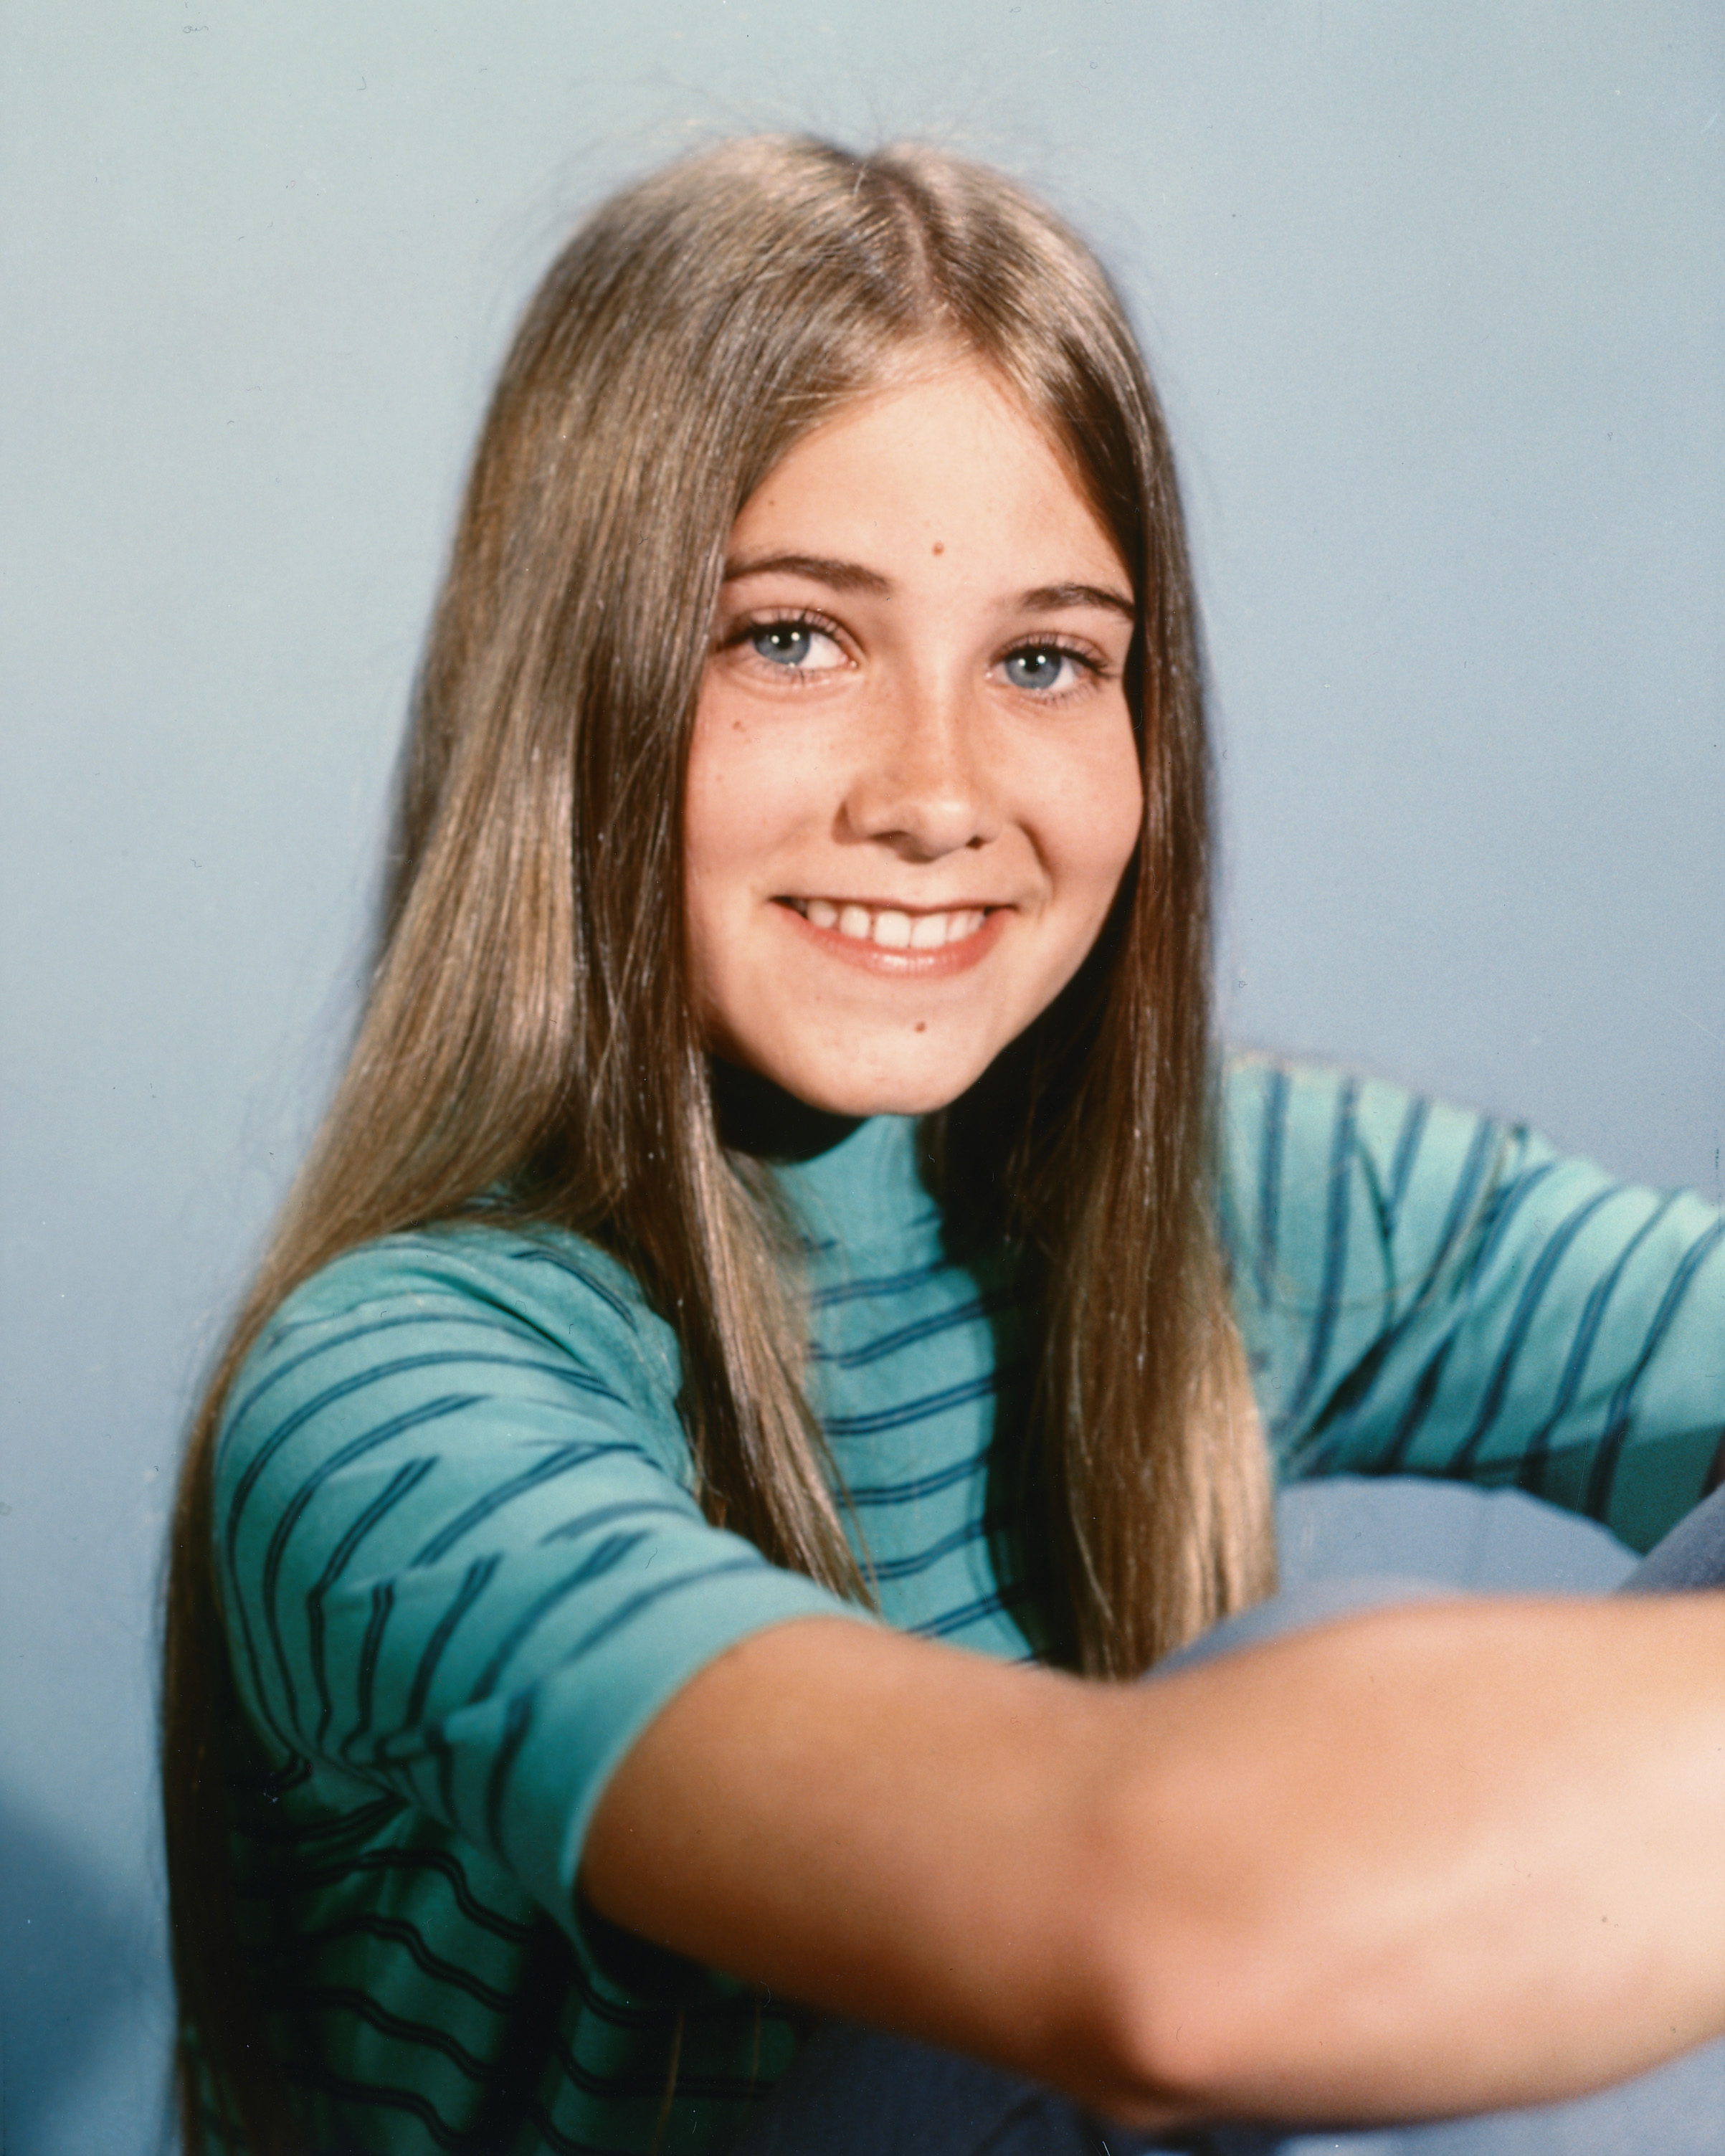 Maureen McCormick in a publicity portrait for "The Brady Bunch" in 1972 | Source: Getty Images